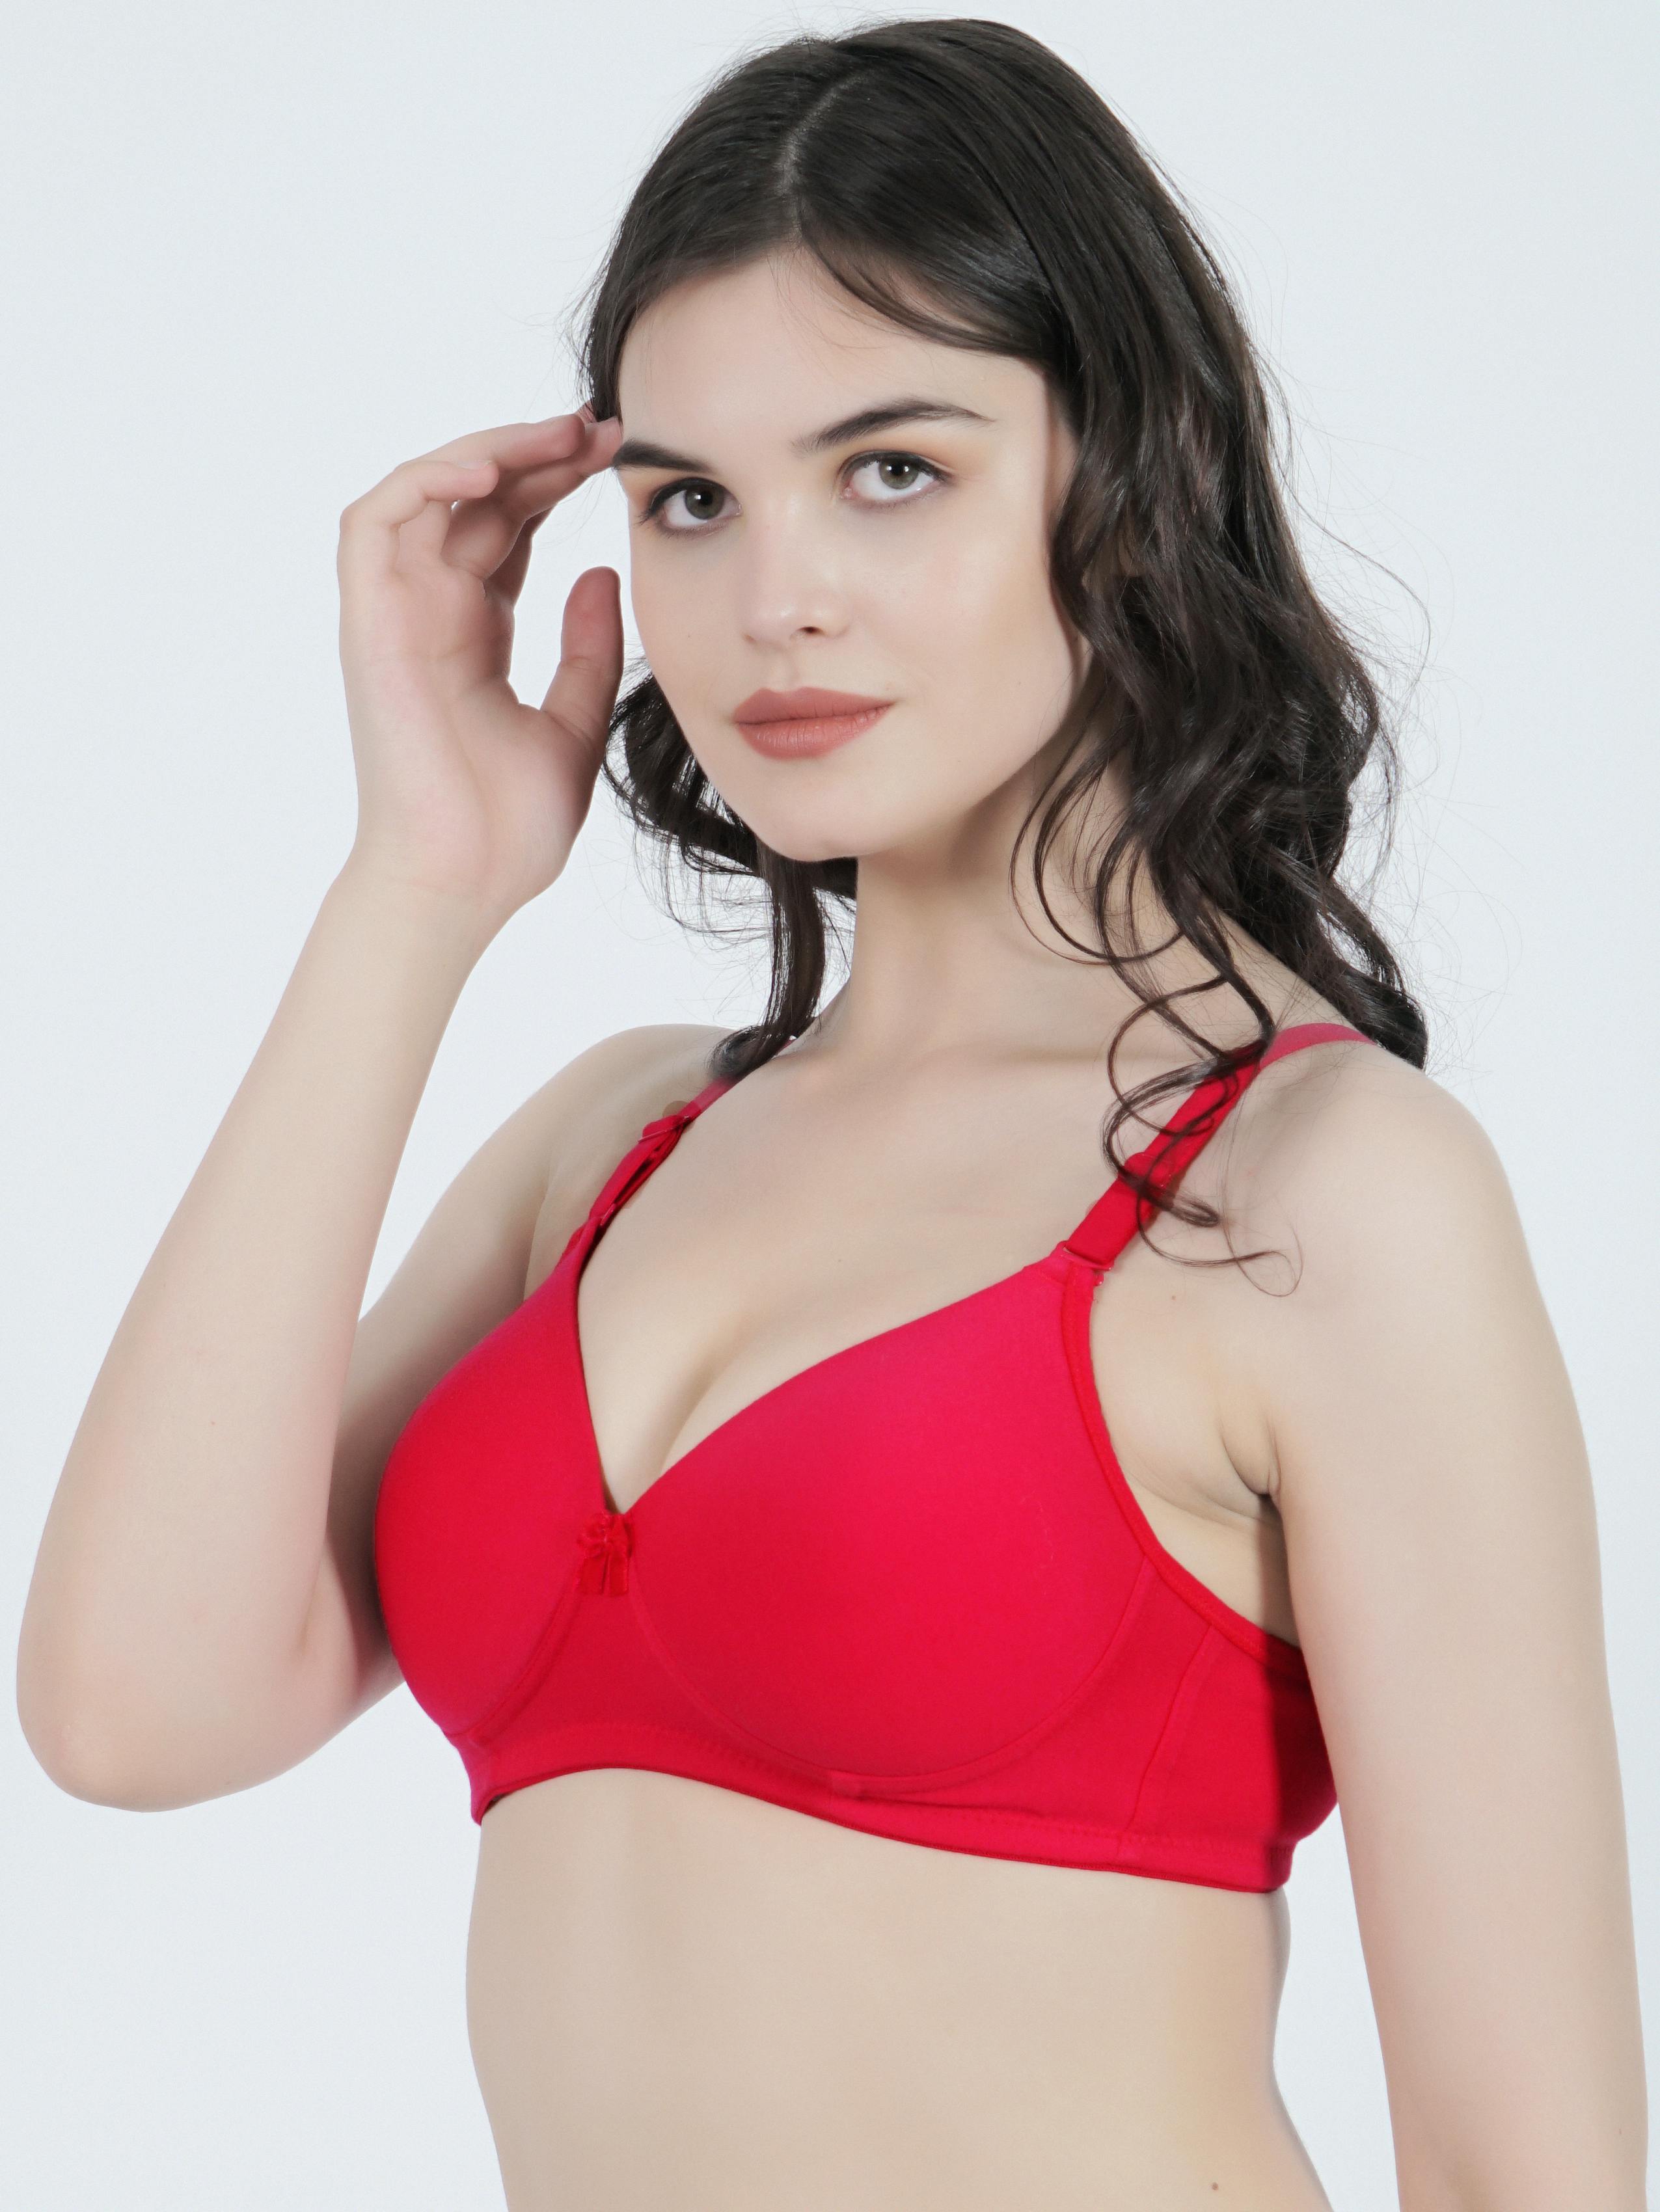 Studio Portrait of a Woman in a Red Bra · Free Stock Photo